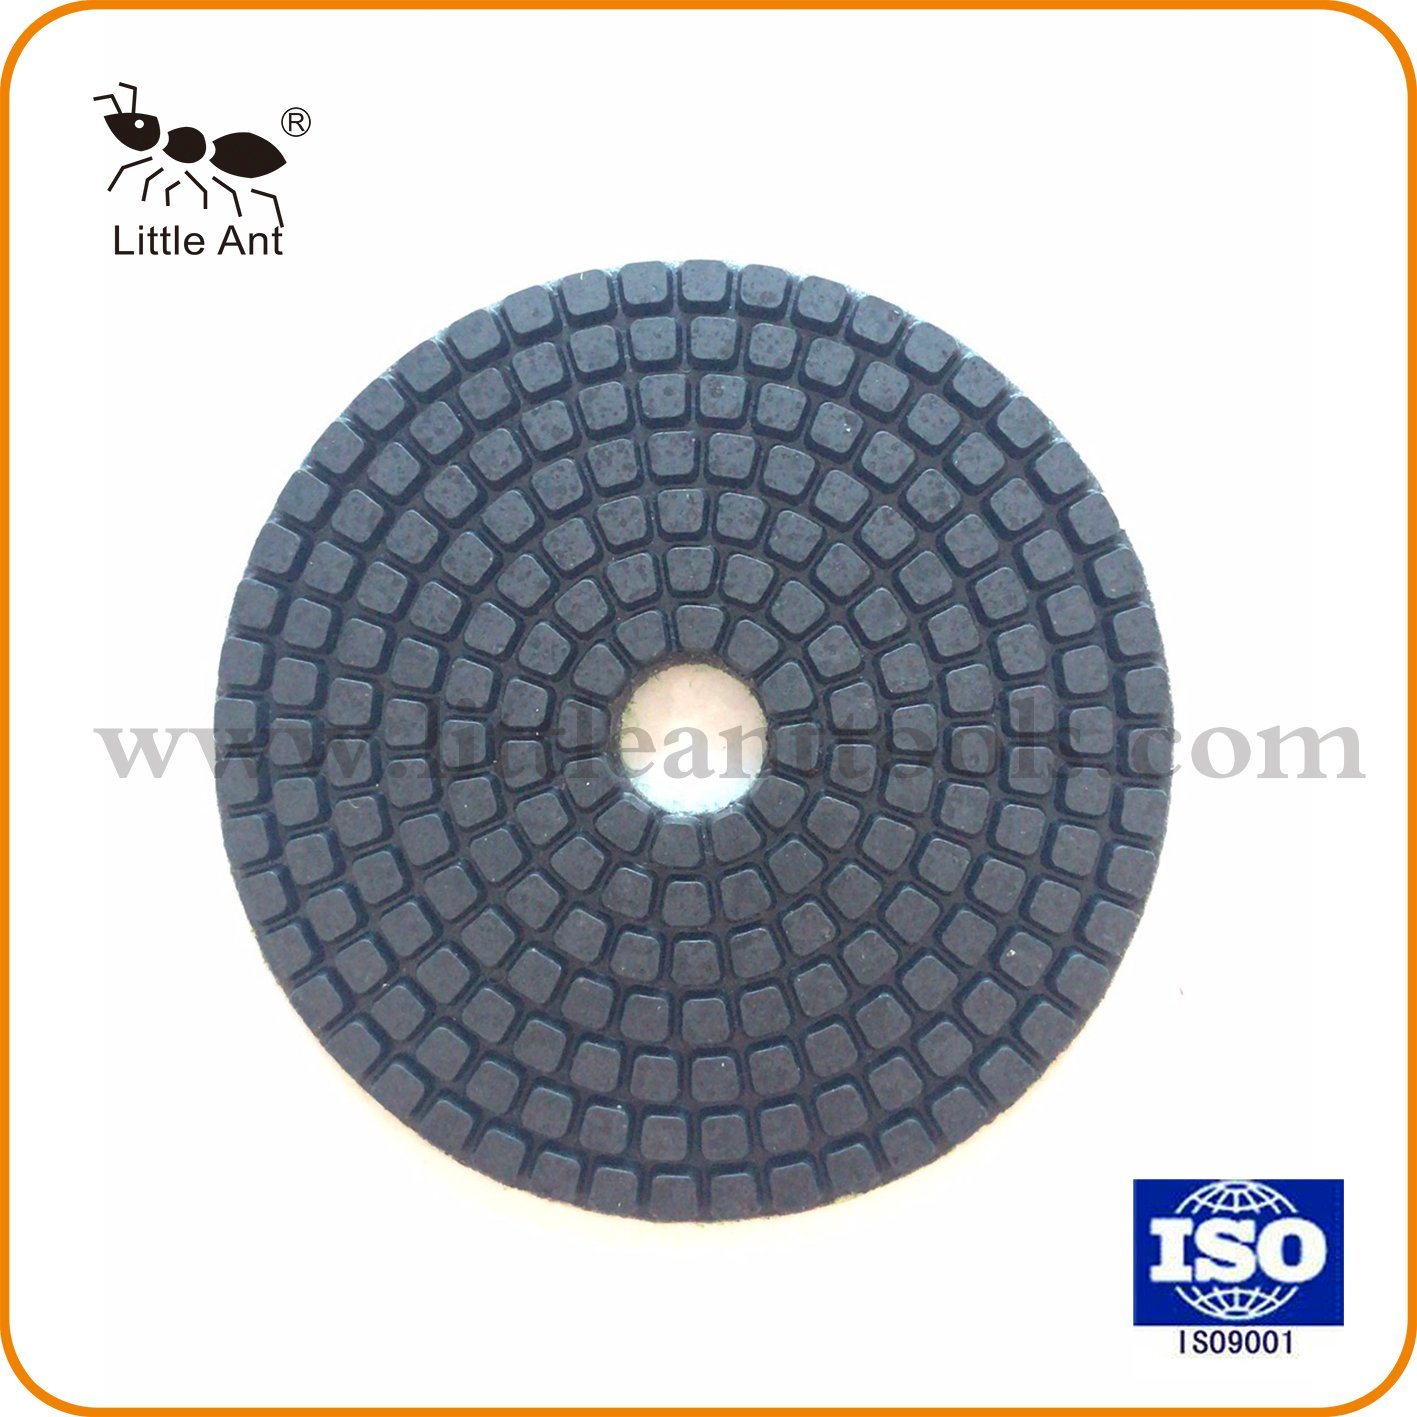 100mm Wet Use Flexible Diamond Polishing Pad for Marble, Granite and Concrete